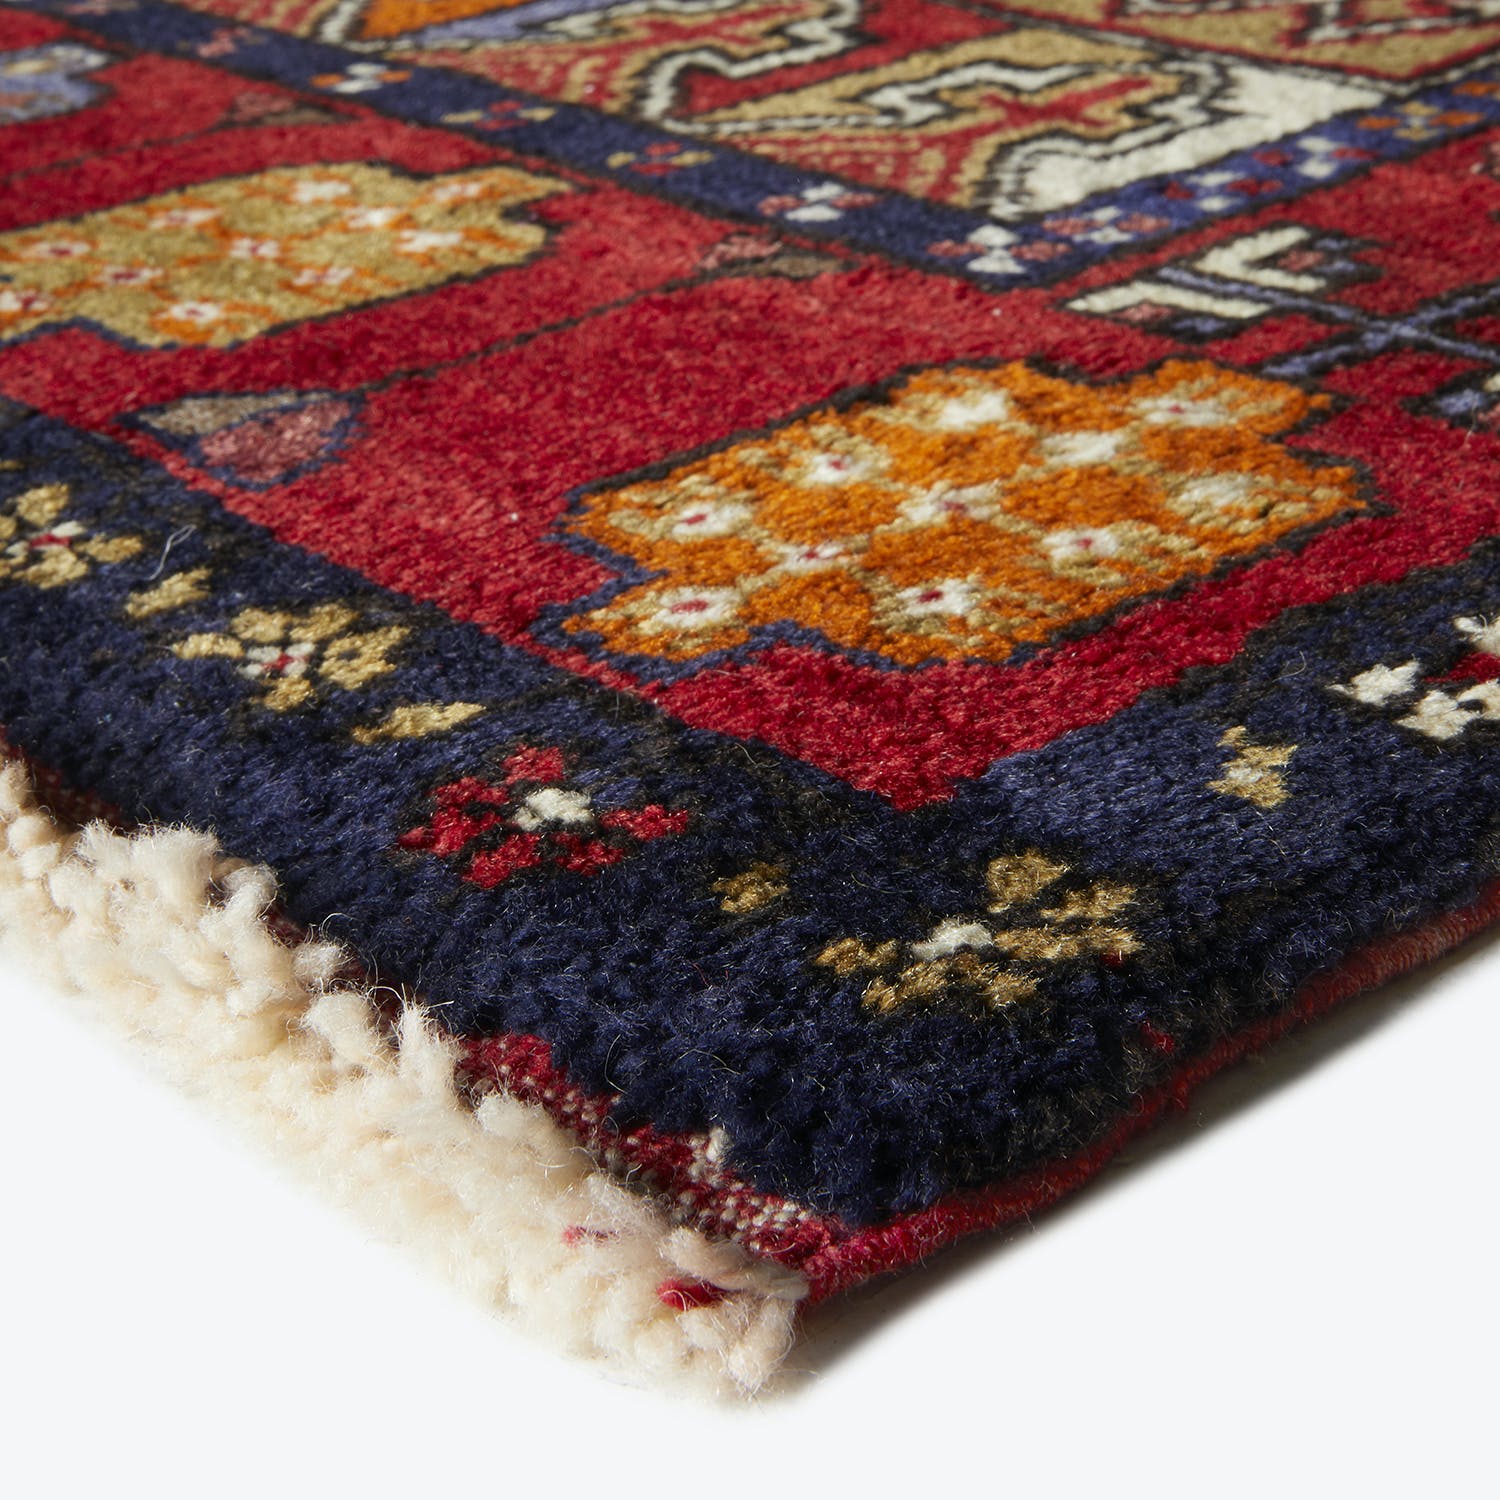 Vibrant, handcrafted rug showcases intricate patterns in rich colors.